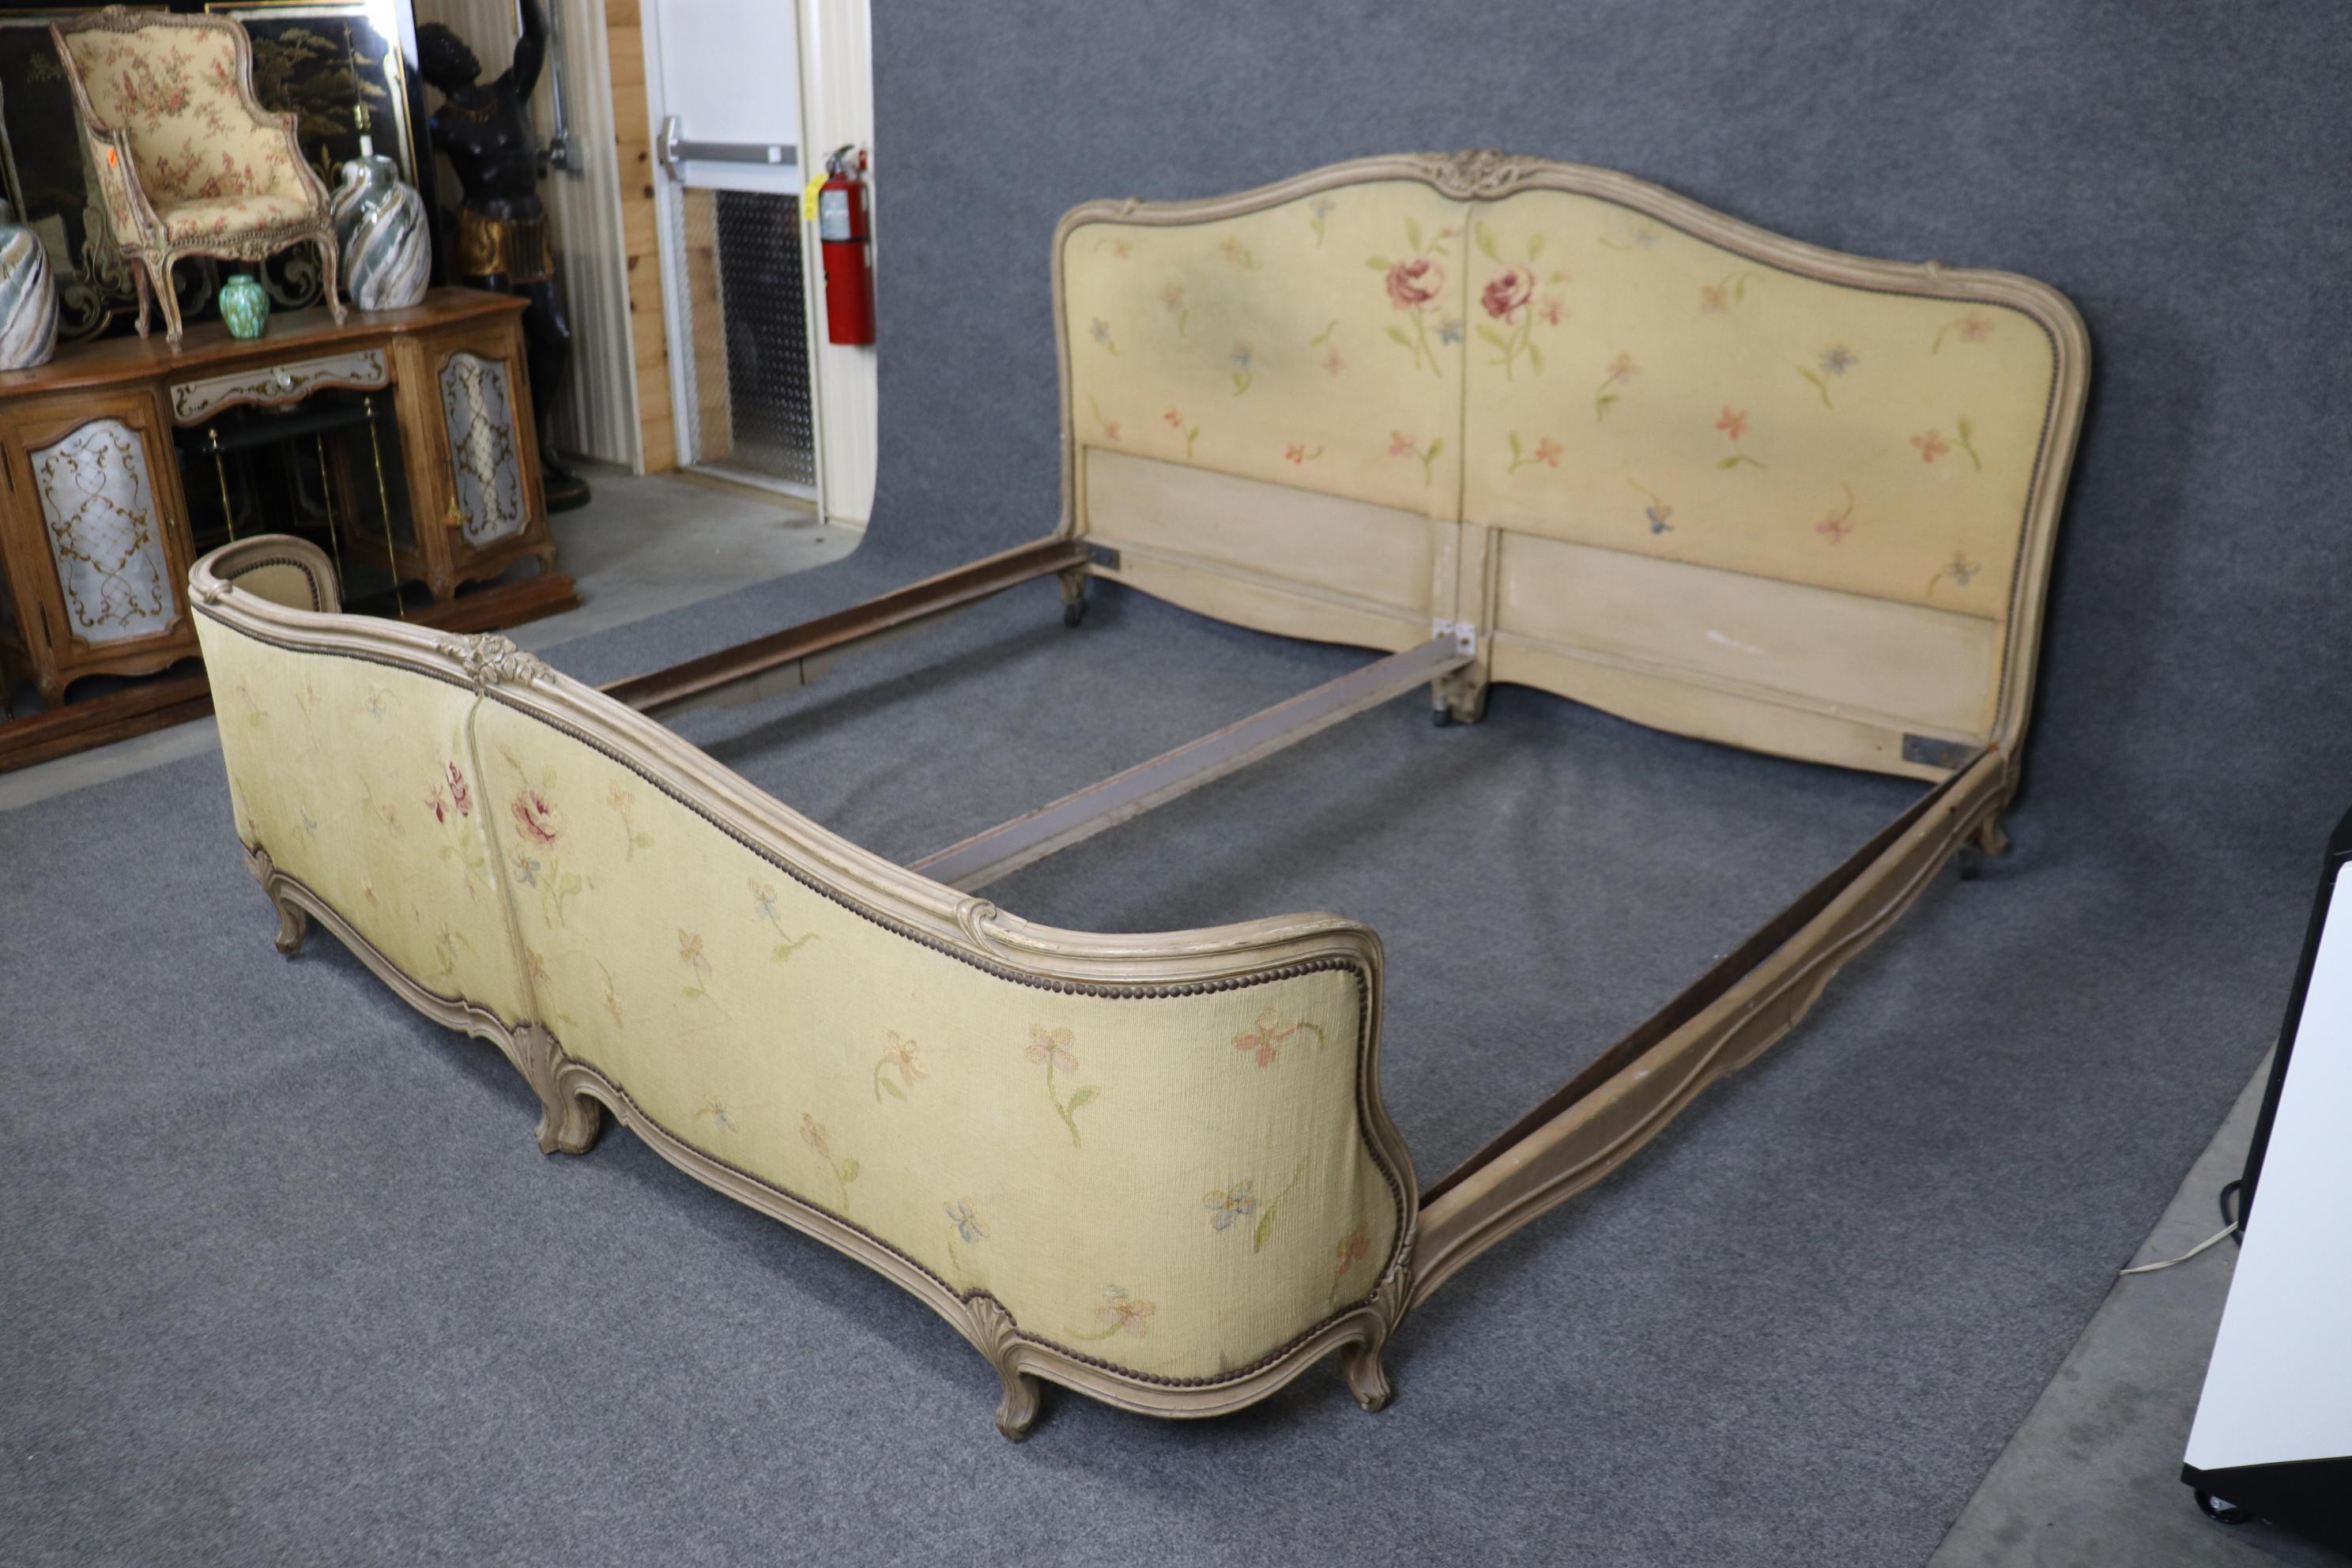 This is definitely not a bed for everyone. This is a bed for someone who wants something EVEN LARGER than a stand or California king size bed which is usually 76 x 80.  The bed is made of multiple parts and a custom-made mattress will be required to